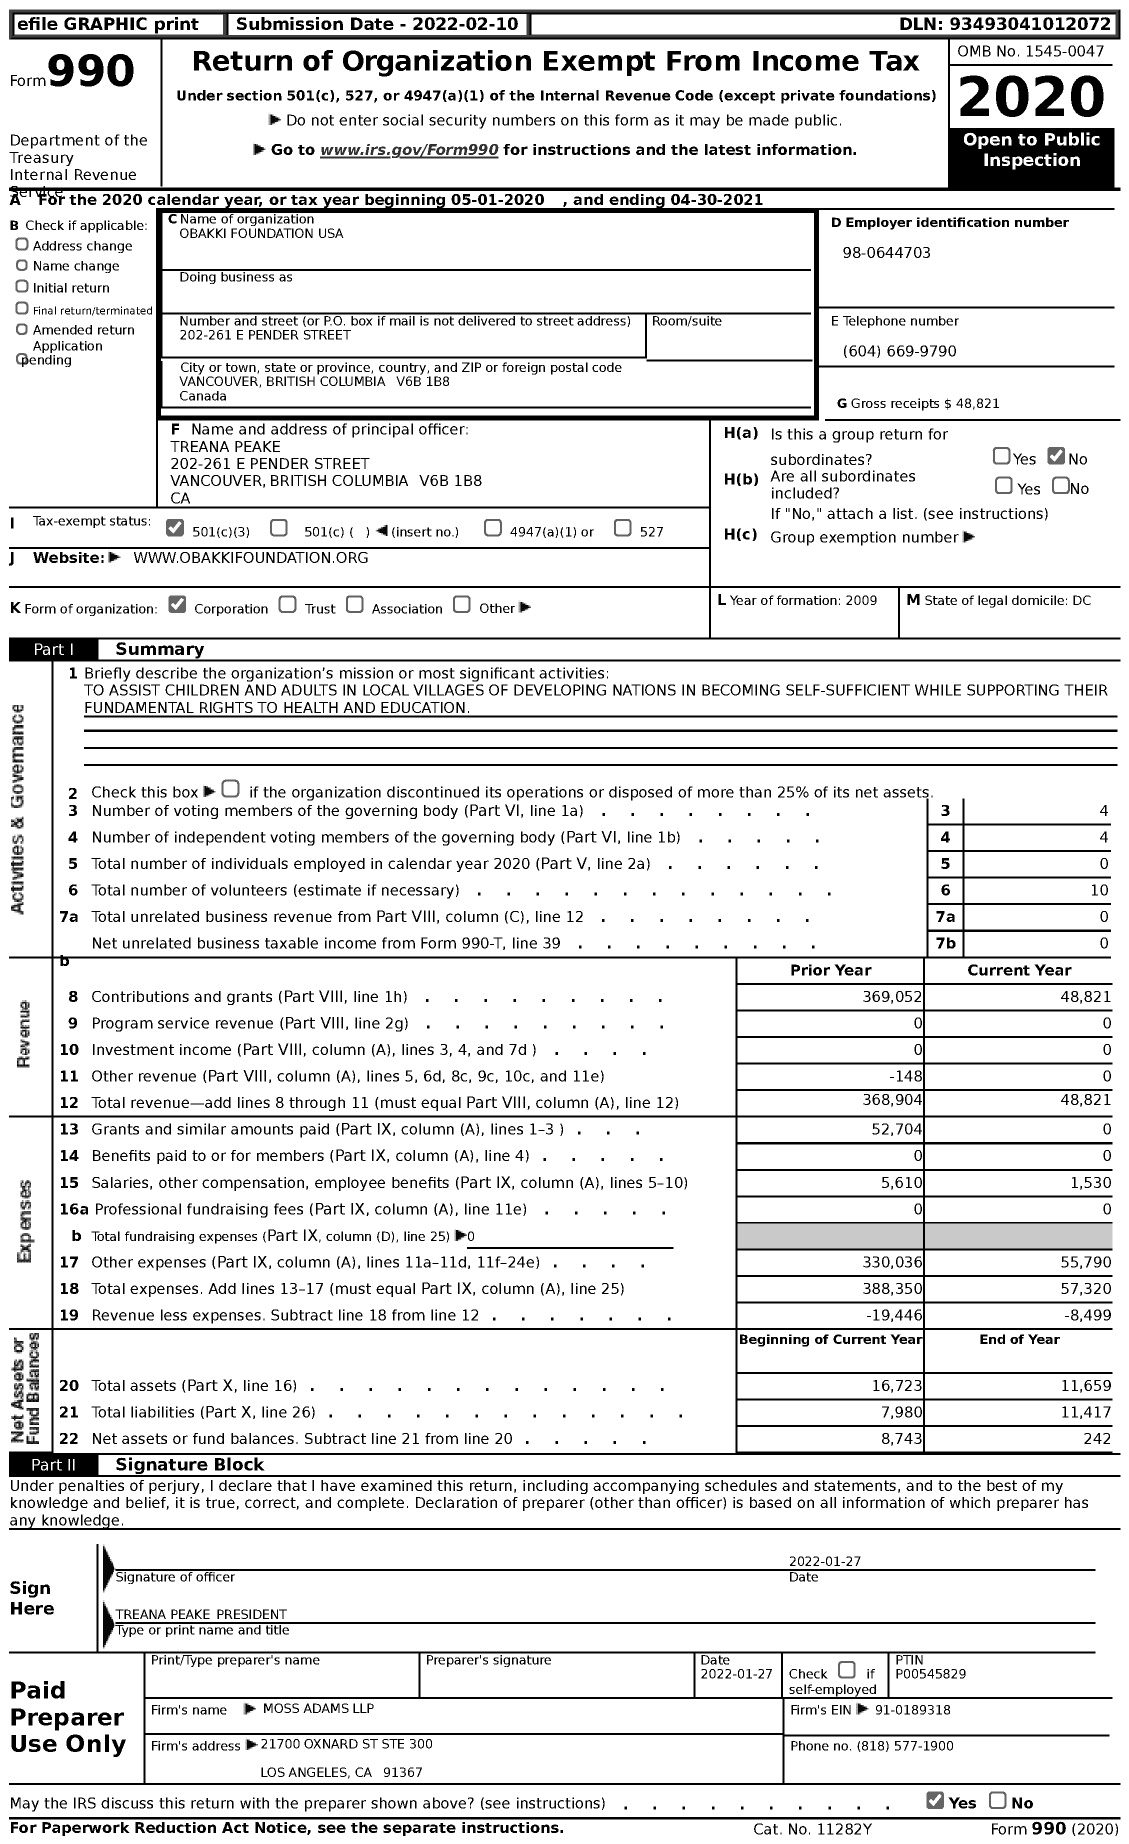 Image of first page of 2020 Form 990 for Obakki Foundation USA